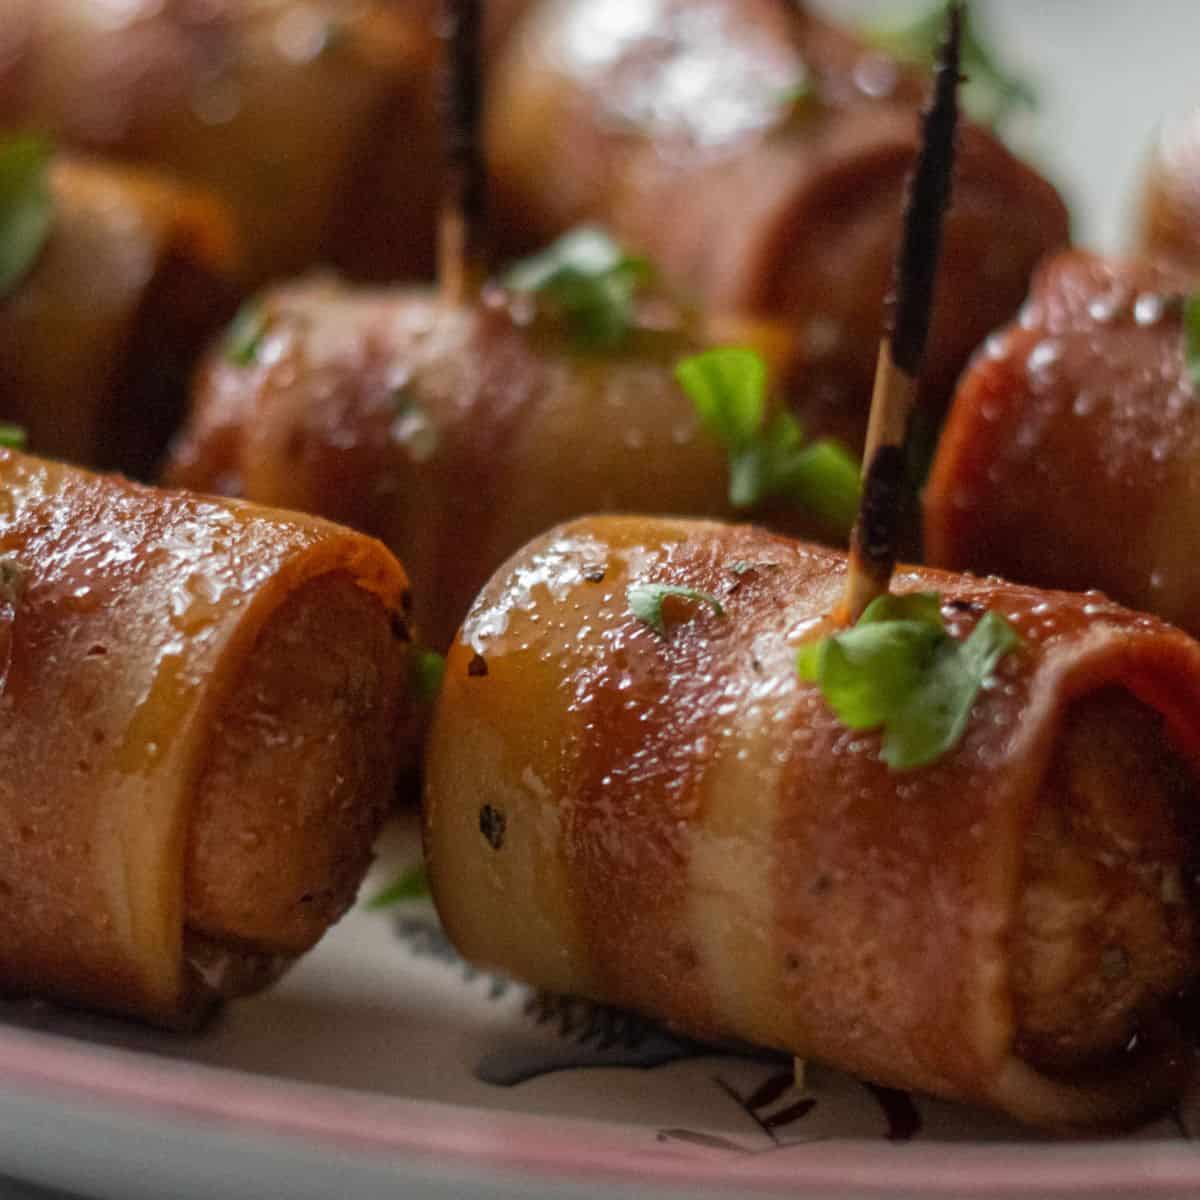 Festive Vegan Pigs in Blankets with a Sticky Maple Marmite Glaze